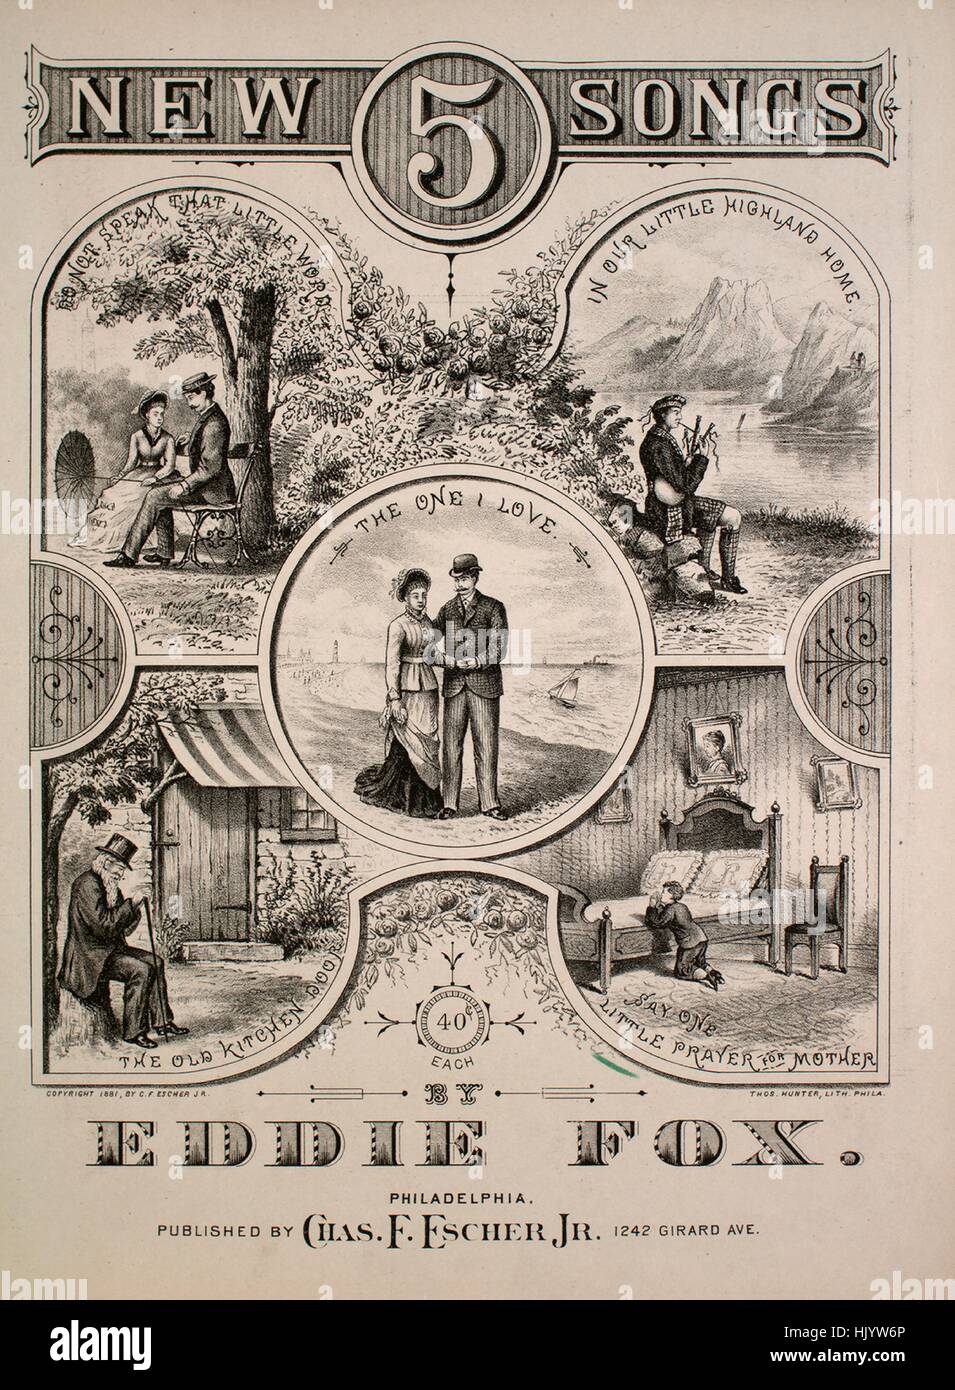 Sheet music cover image of the song '5 New Songs Say One Little Prayer for Mother', with original authorship notes reading 'By Eddie Fox', United States, 1881. The publisher is listed as 'Chas. F. Escher, Jr., 1242 Girard Ave.', the form of composition is 'strophic with chorus', the instrumentation is 'piano and voice (solo and satb chorus)', the first line reads 'Say one little pray'r for mother, in the distant by and by', and the illustration artist is listed as 'Thos. Hunter, Lith. Phila.'. Stock Photo